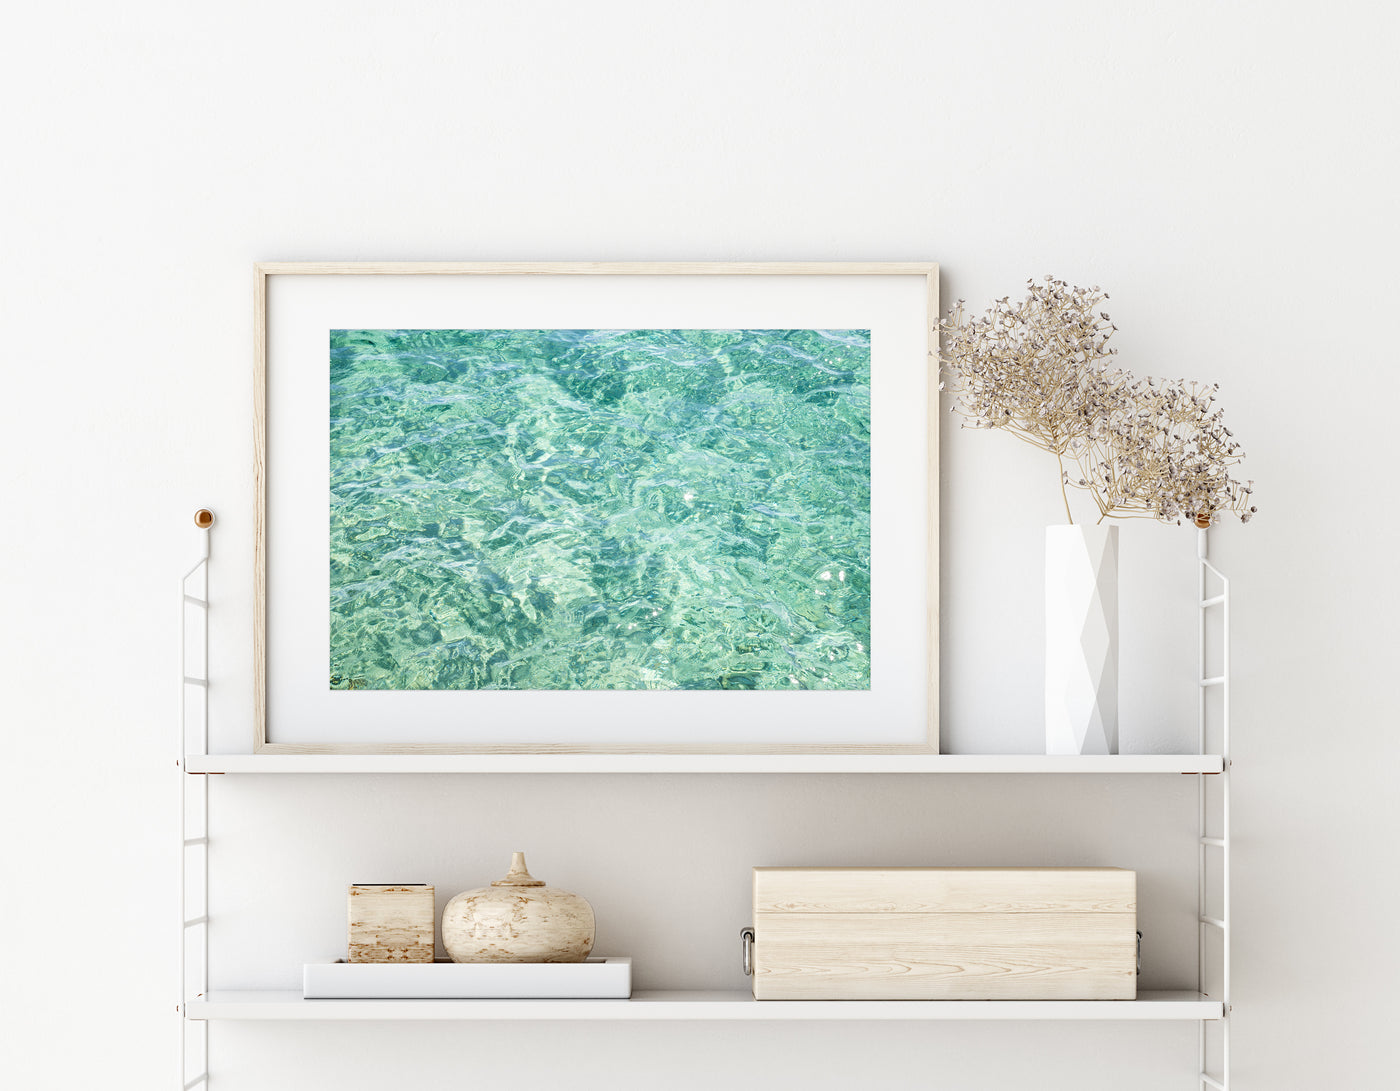 Abstract Water - Mint green art print by Cattie Coyle Photography